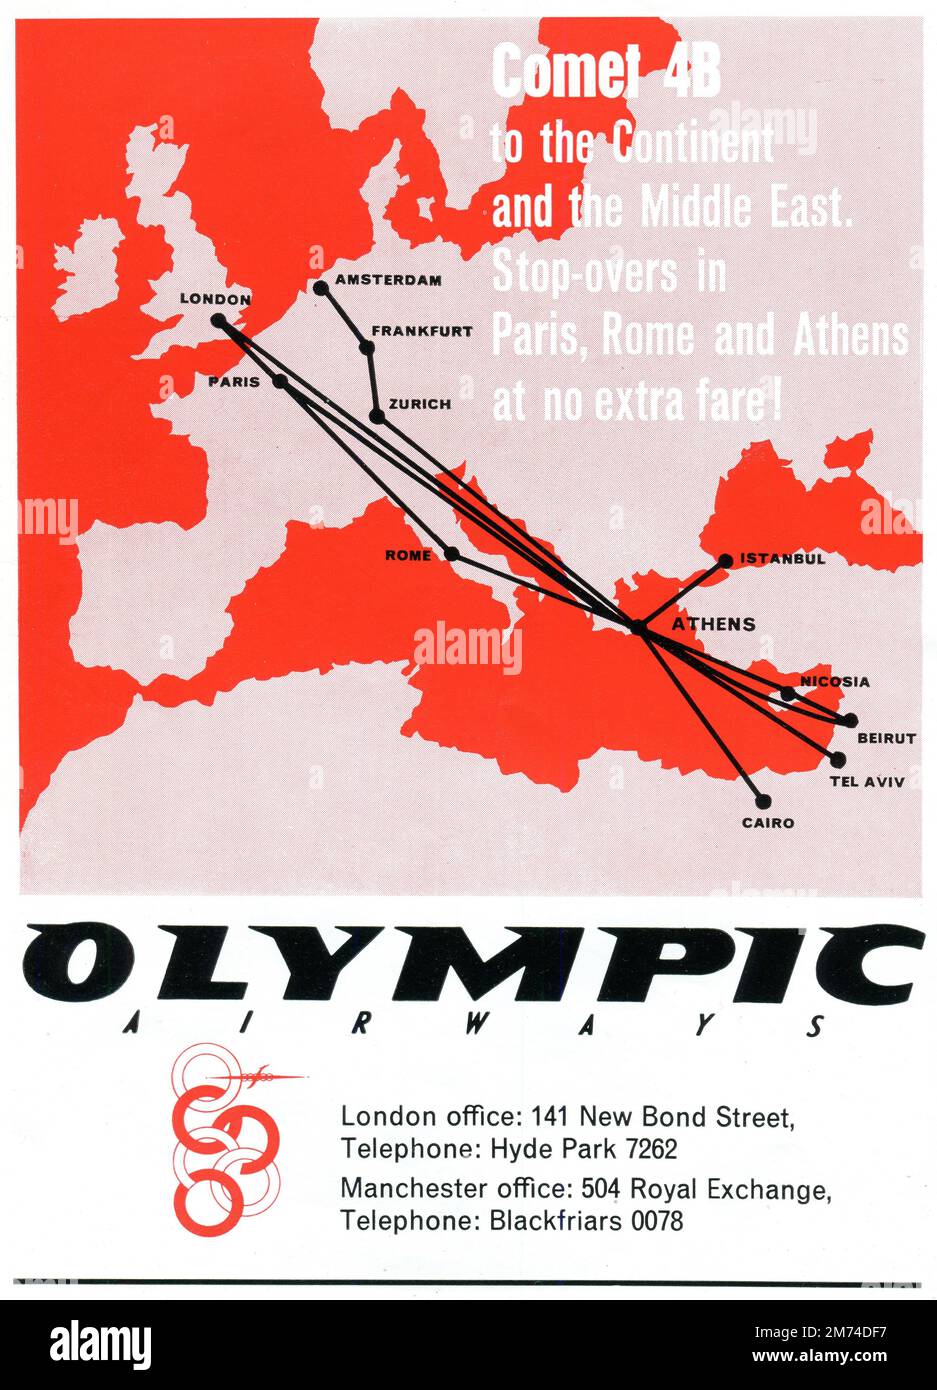 A 1964 advertisement by the airline ‘Olympic Airways’, promoting their De Havilland Comet service. It depicts a map illustrating their routes, together with the slogan “Comet 4B to the Continent and the Middle East. Stop-overs in Paris, Rome and Athens at no extra fare!”. Olympic Airways (later called Olympic Airlines) was the flag carrier airline of Greece which operated for over 40 years between 1957 and 2009. Stock Photo